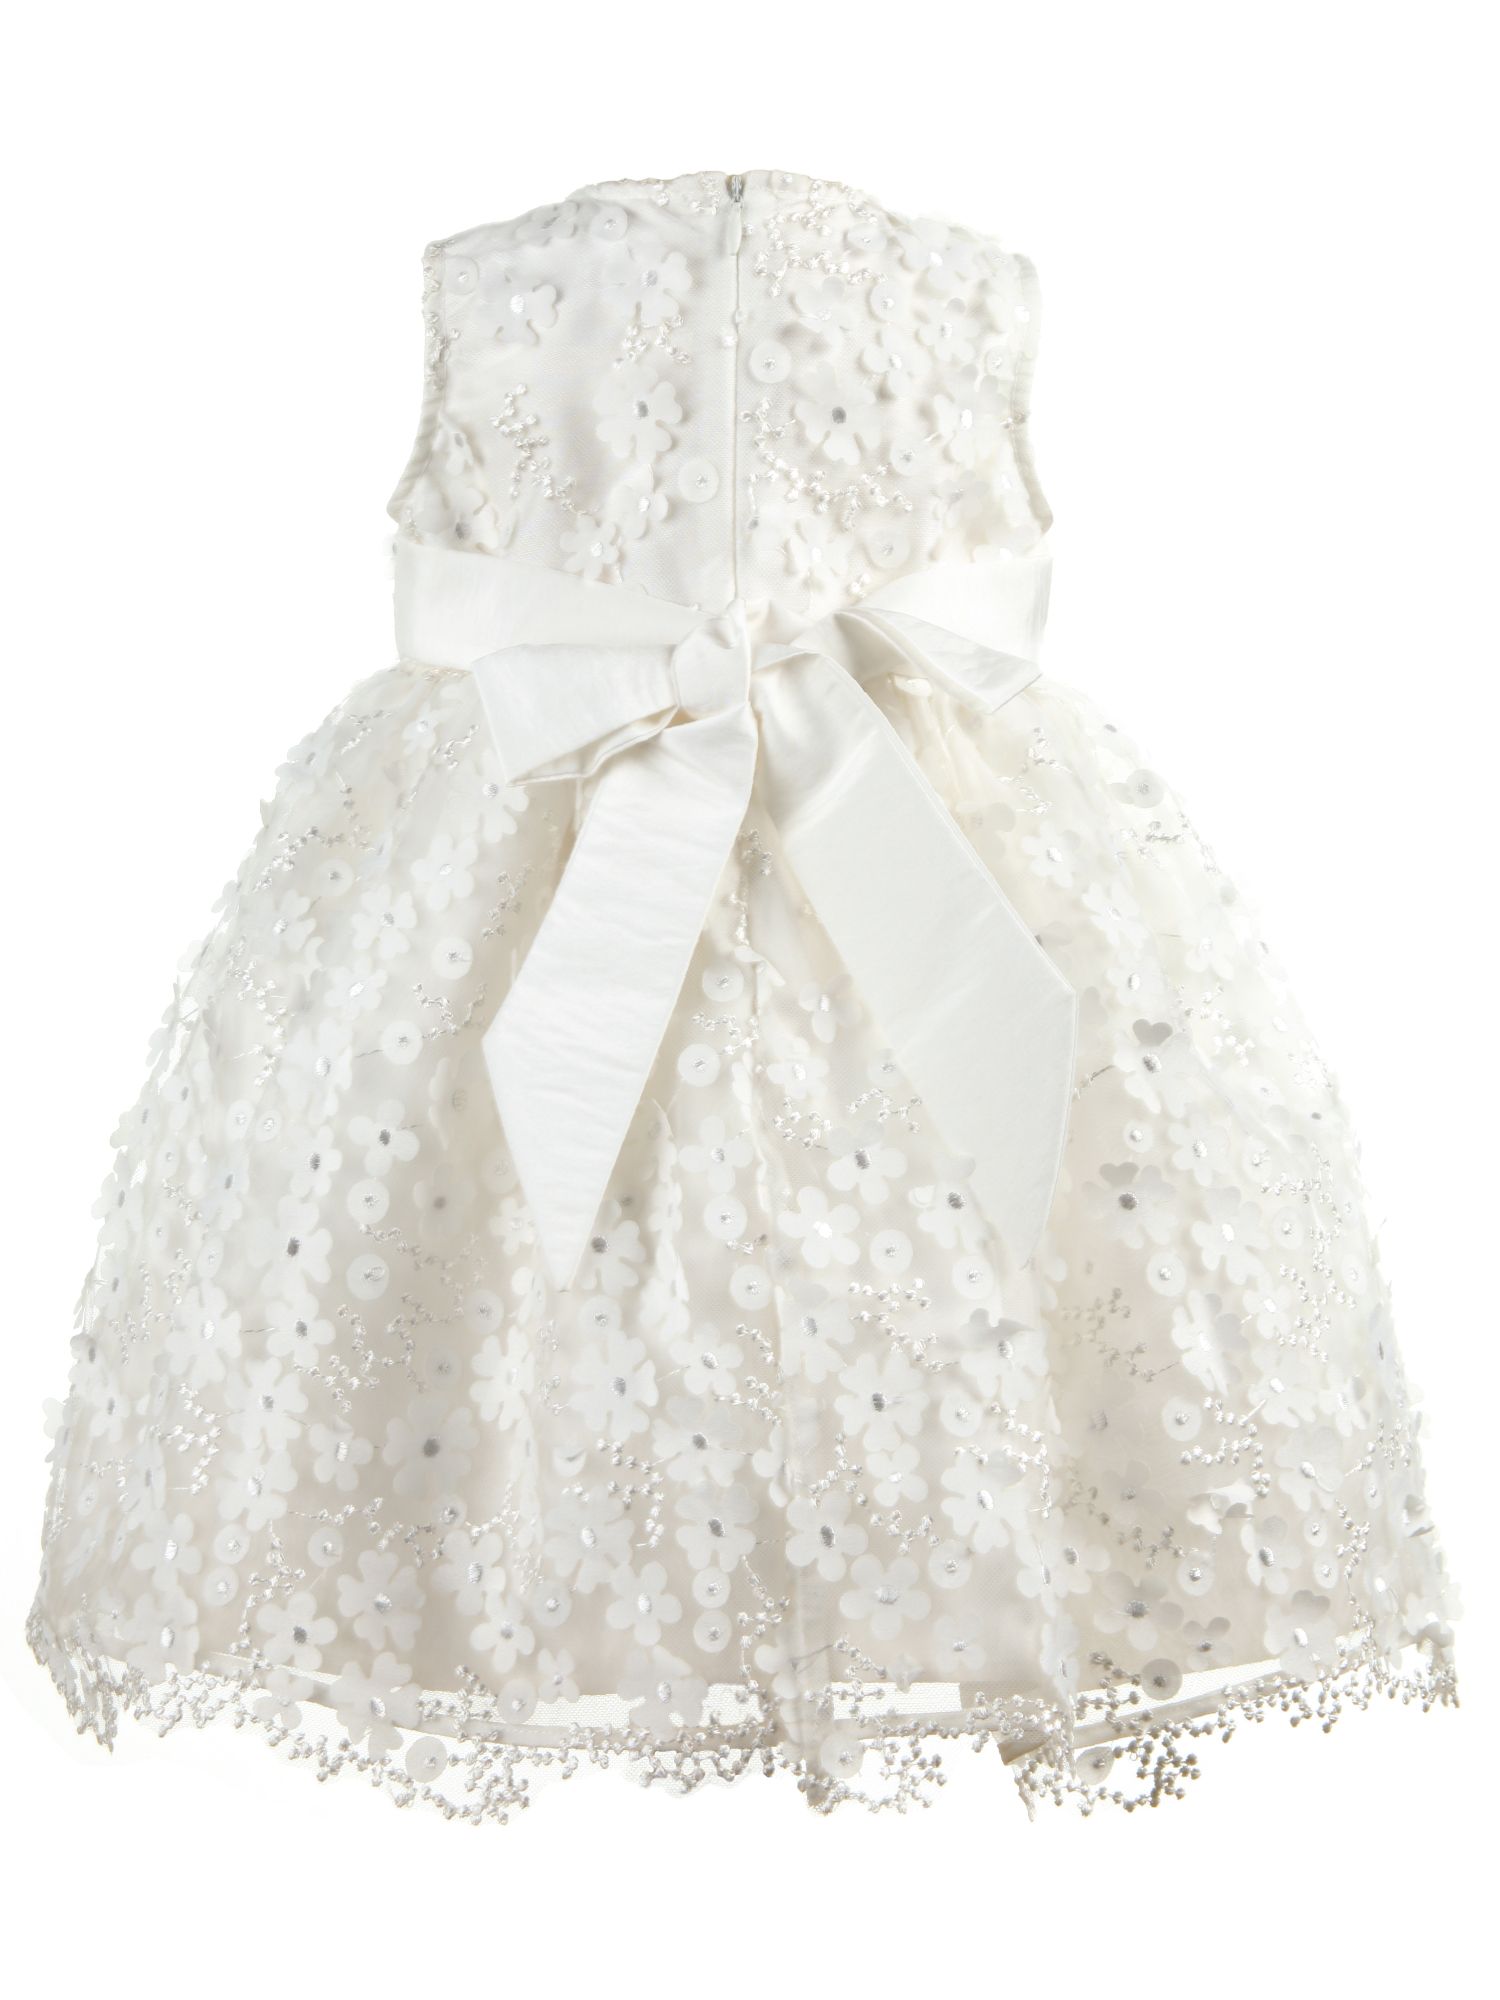 Baby Special Occasion Dress